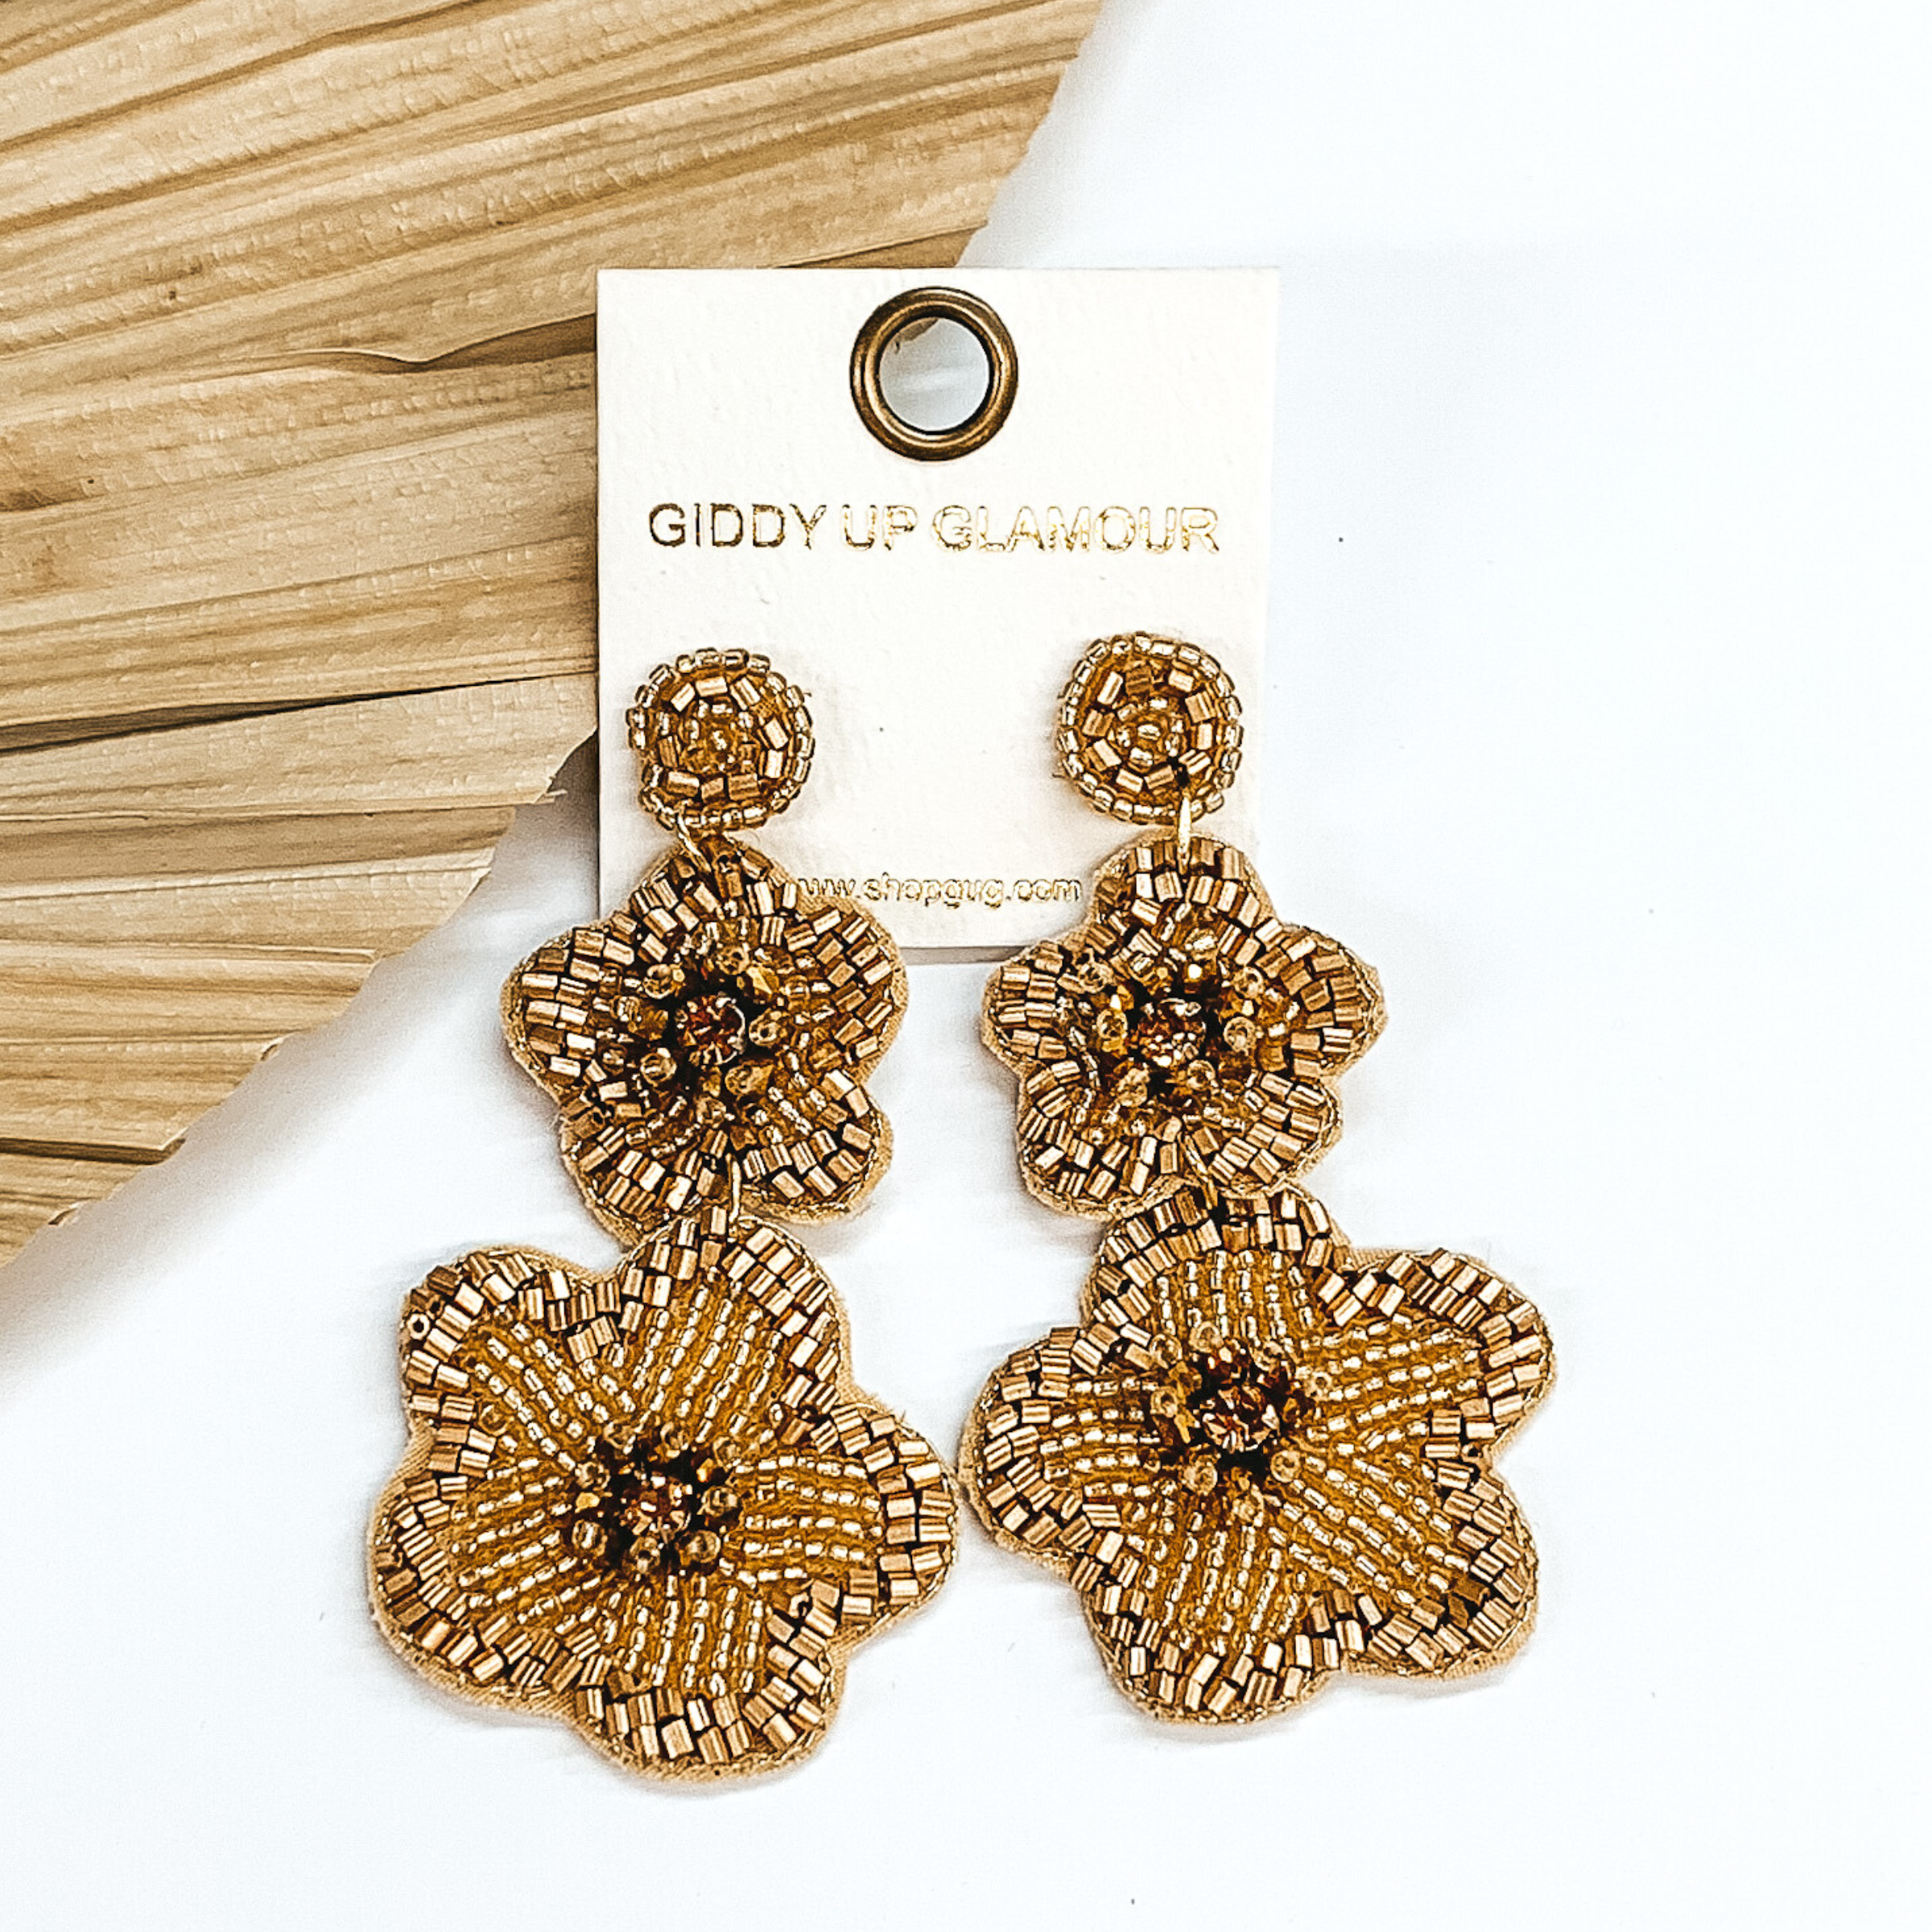 Gold beaded circle post back earrings. There is a two hanging beaded flower pendant from the gold stud earrings. The flower pendants are gold with a gold outline and detailing. These earrings are pictured on a white background with a dried palm leaf in the background. 